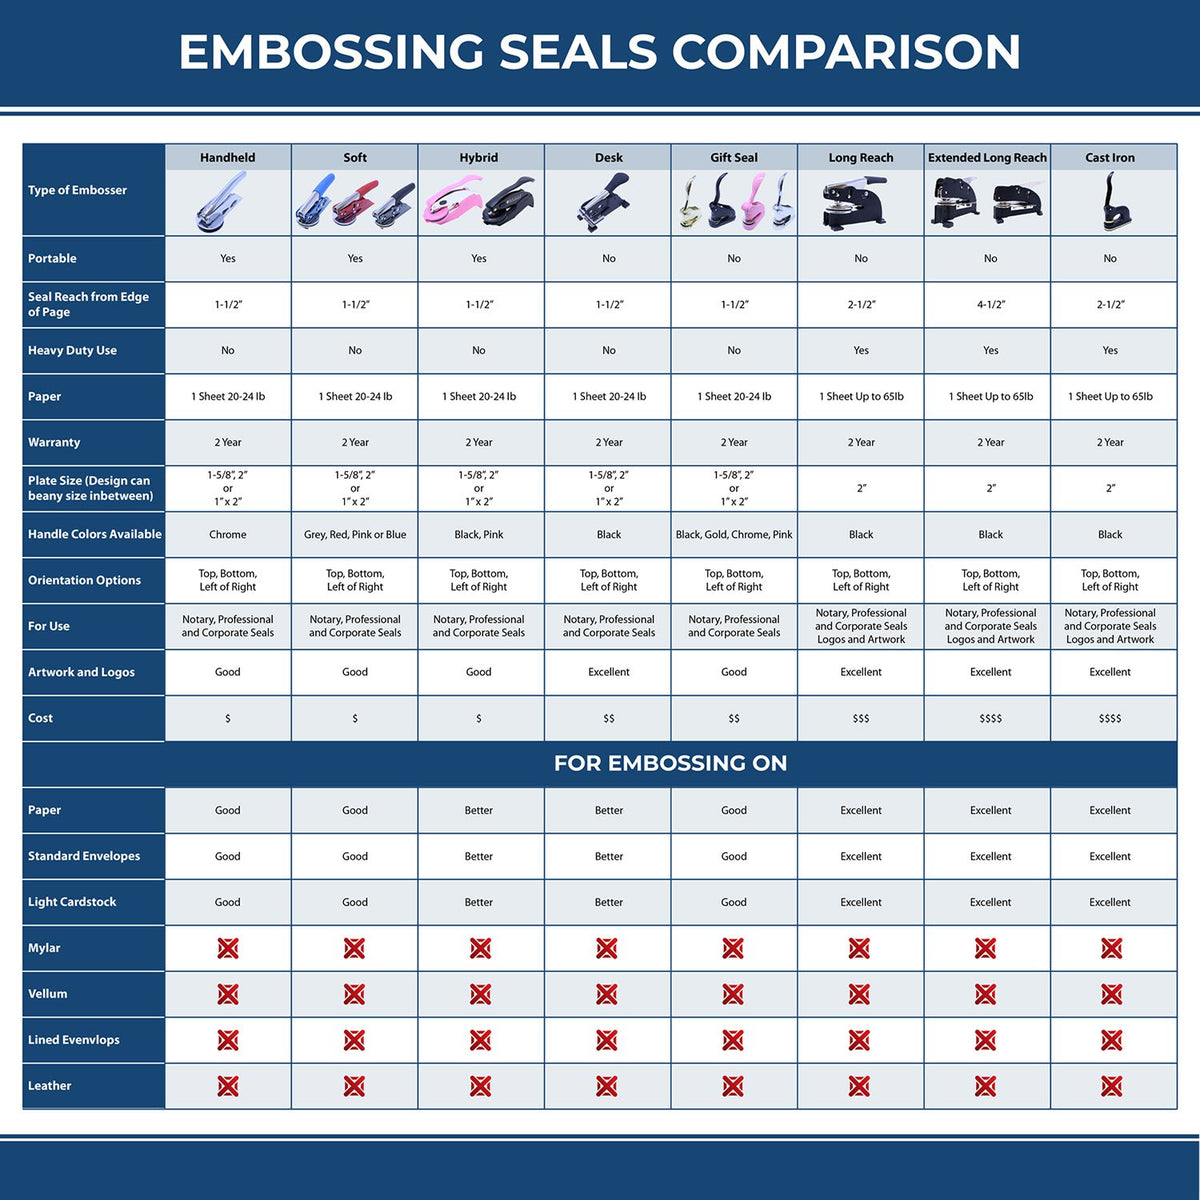 A comparison chart for the different types of mount models available for the State of Connecticut Long Reach Architectural Embossing Seal.